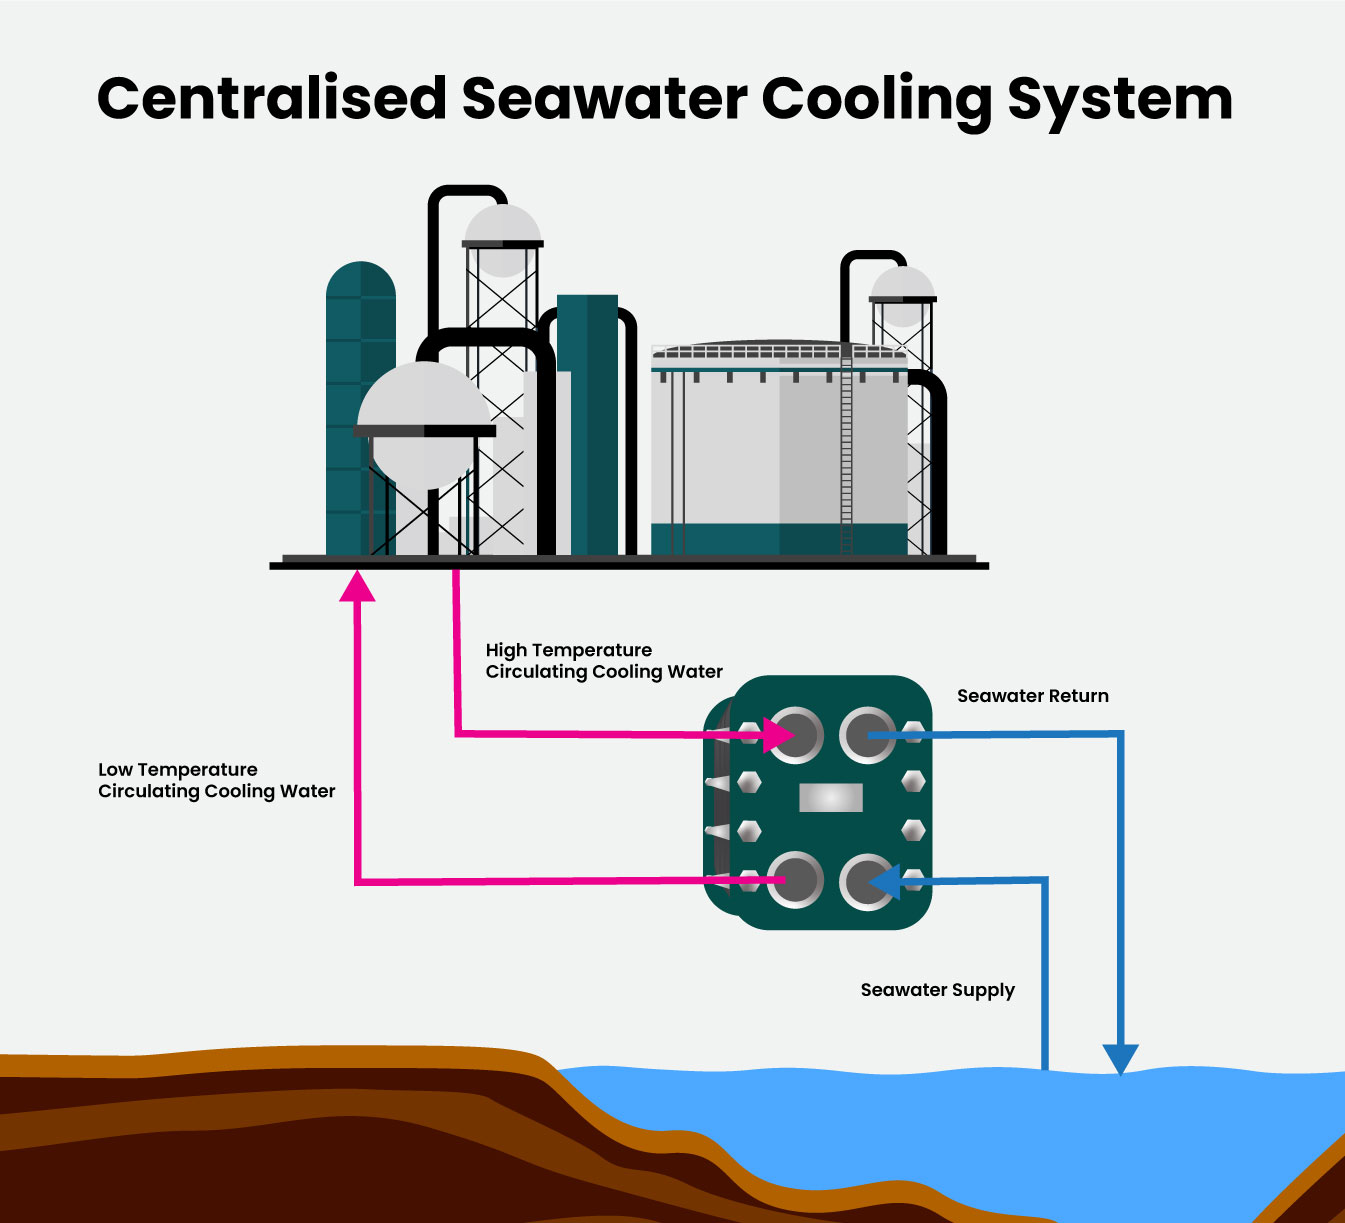 Centralised Seawater Cooling System